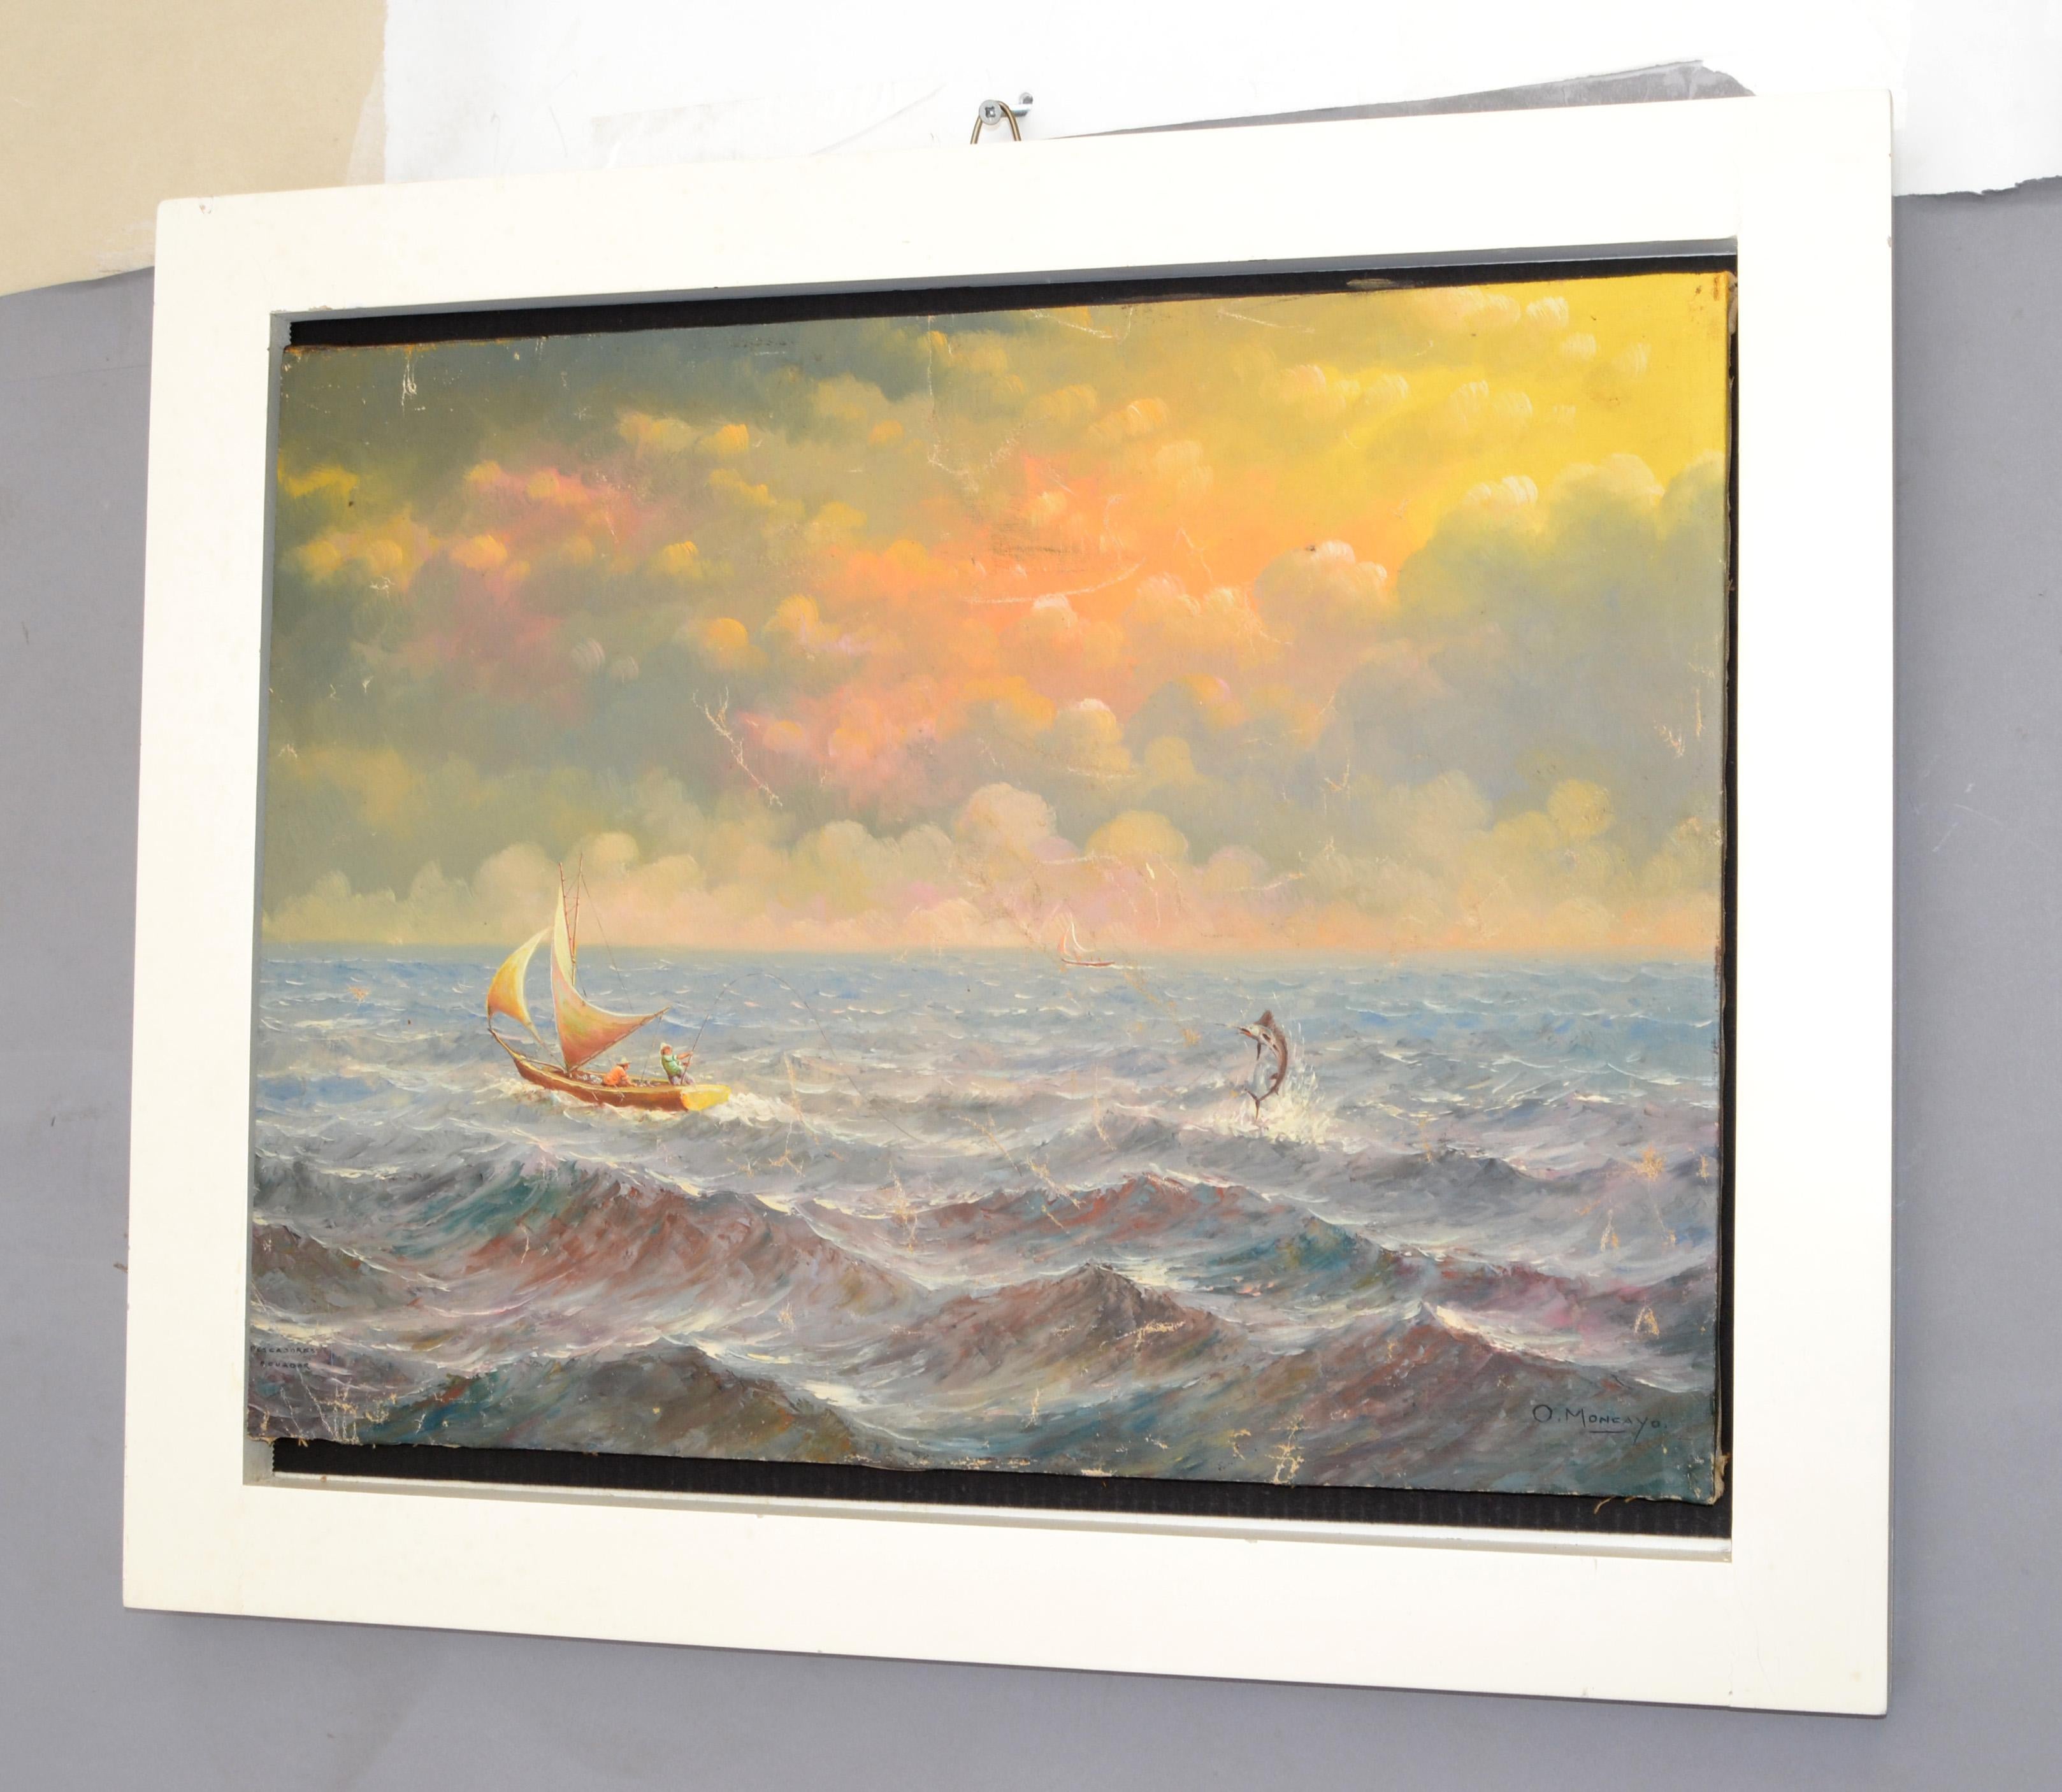 White Framed O. Moncayo Seascape Painting Acrylic on Canvas Mid-Century Modern   In Good Condition For Sale In Miami, FL